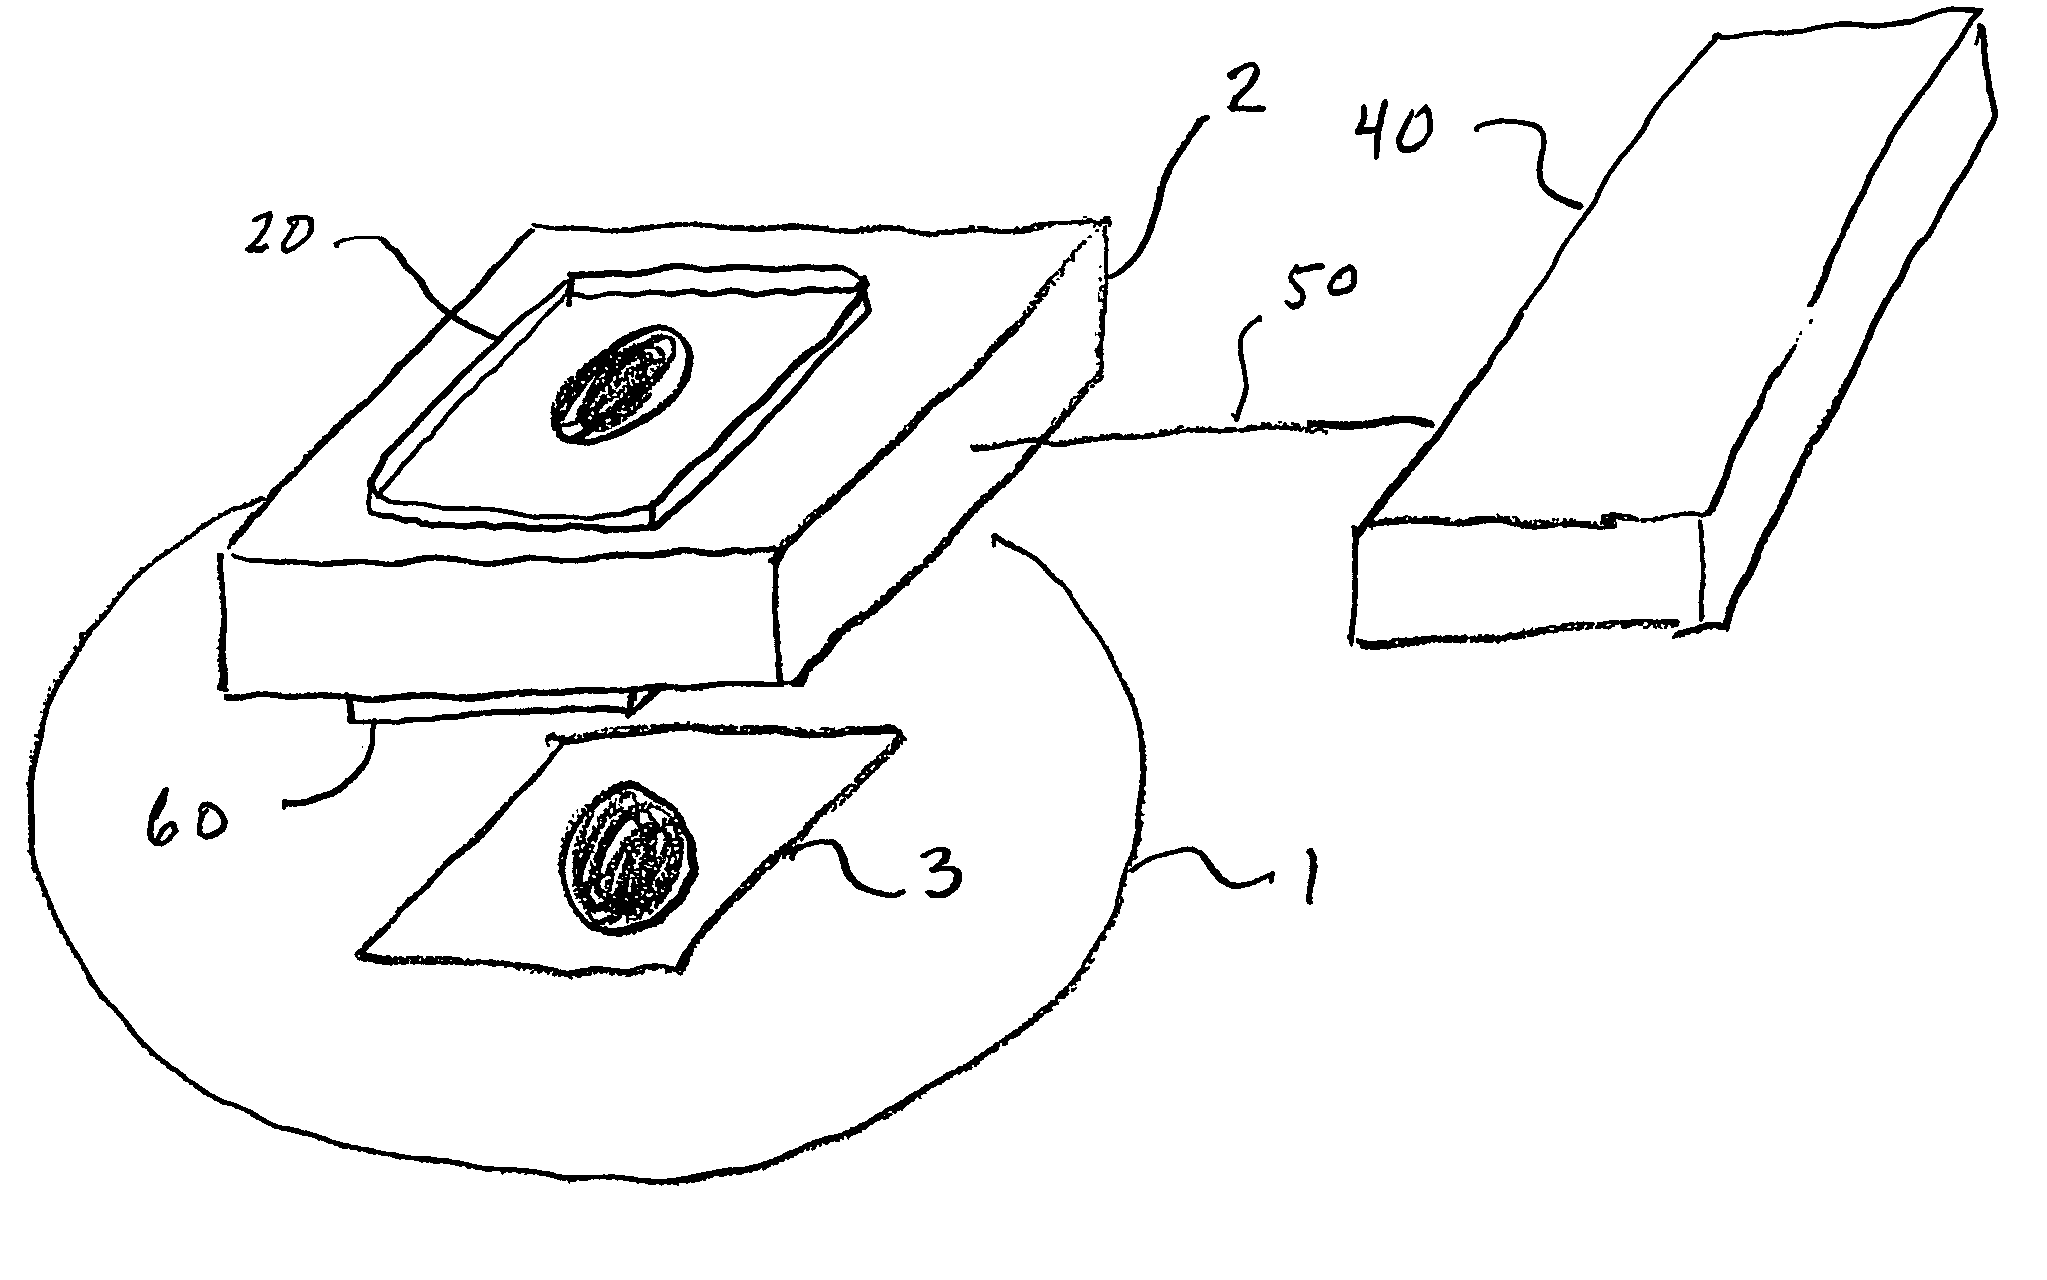 Intuitive ultrasonic imaging system and related method thereof